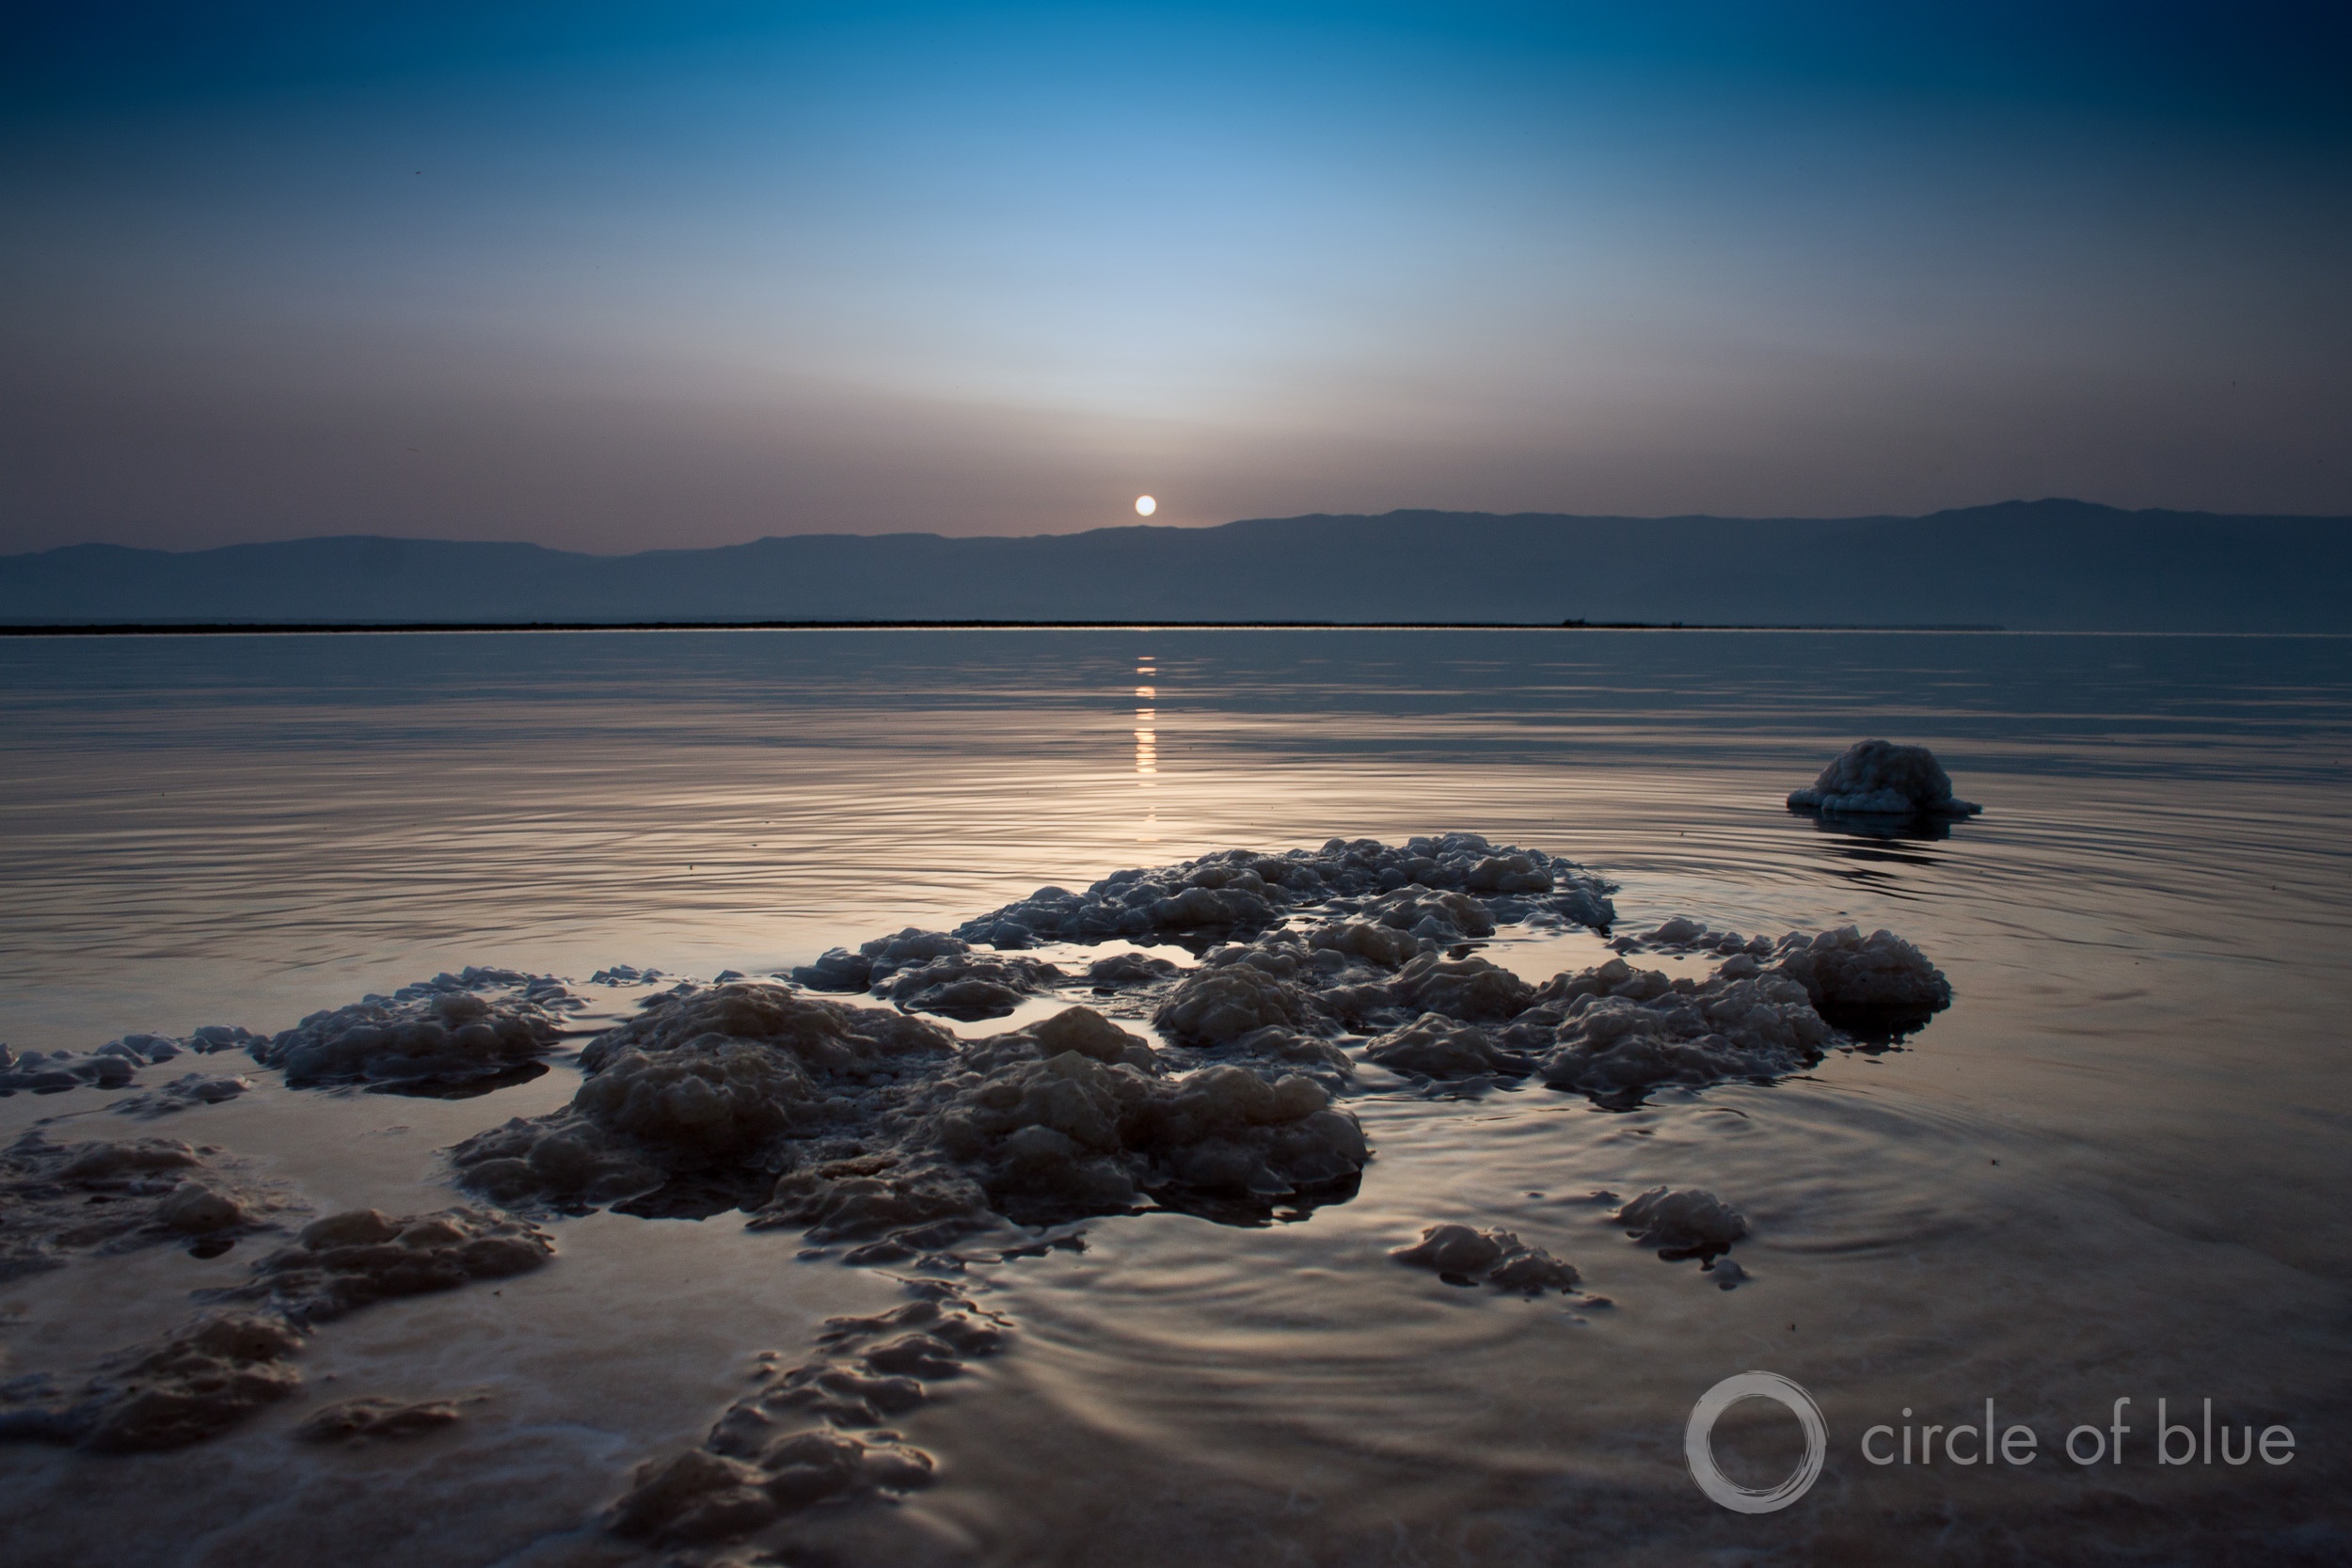 Sunrise over the Dead Sea is veiled by haze. Halting the decline of the shrinking sea is a top water policy question in the Jordan River Basin. Photo © Brett Walton / Circle of Blue